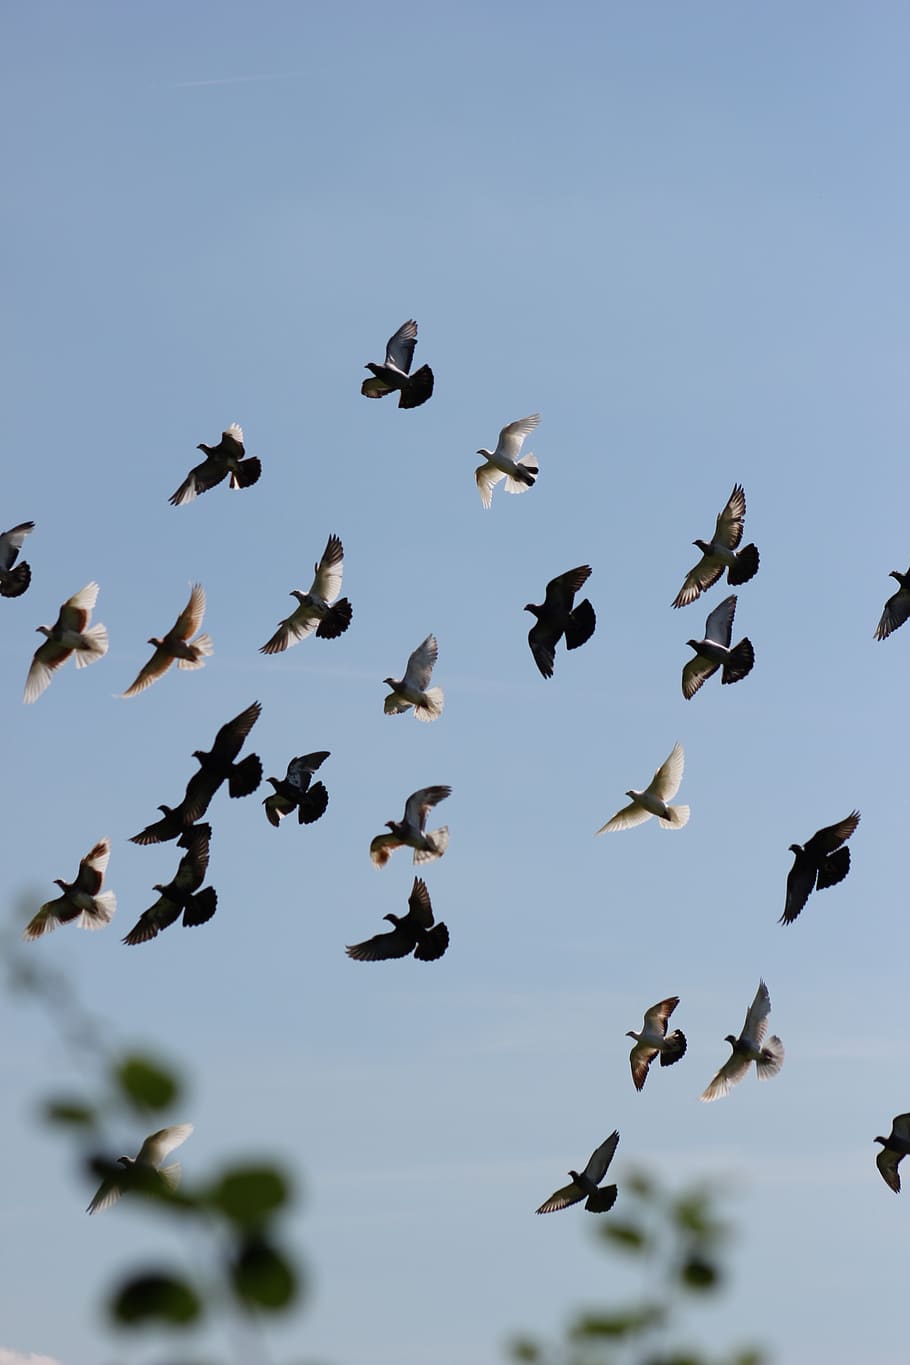 pigeons, homing pigeon, dove, flying, silhouette, sky, dom, animal wildlife, group of animals, animal themes